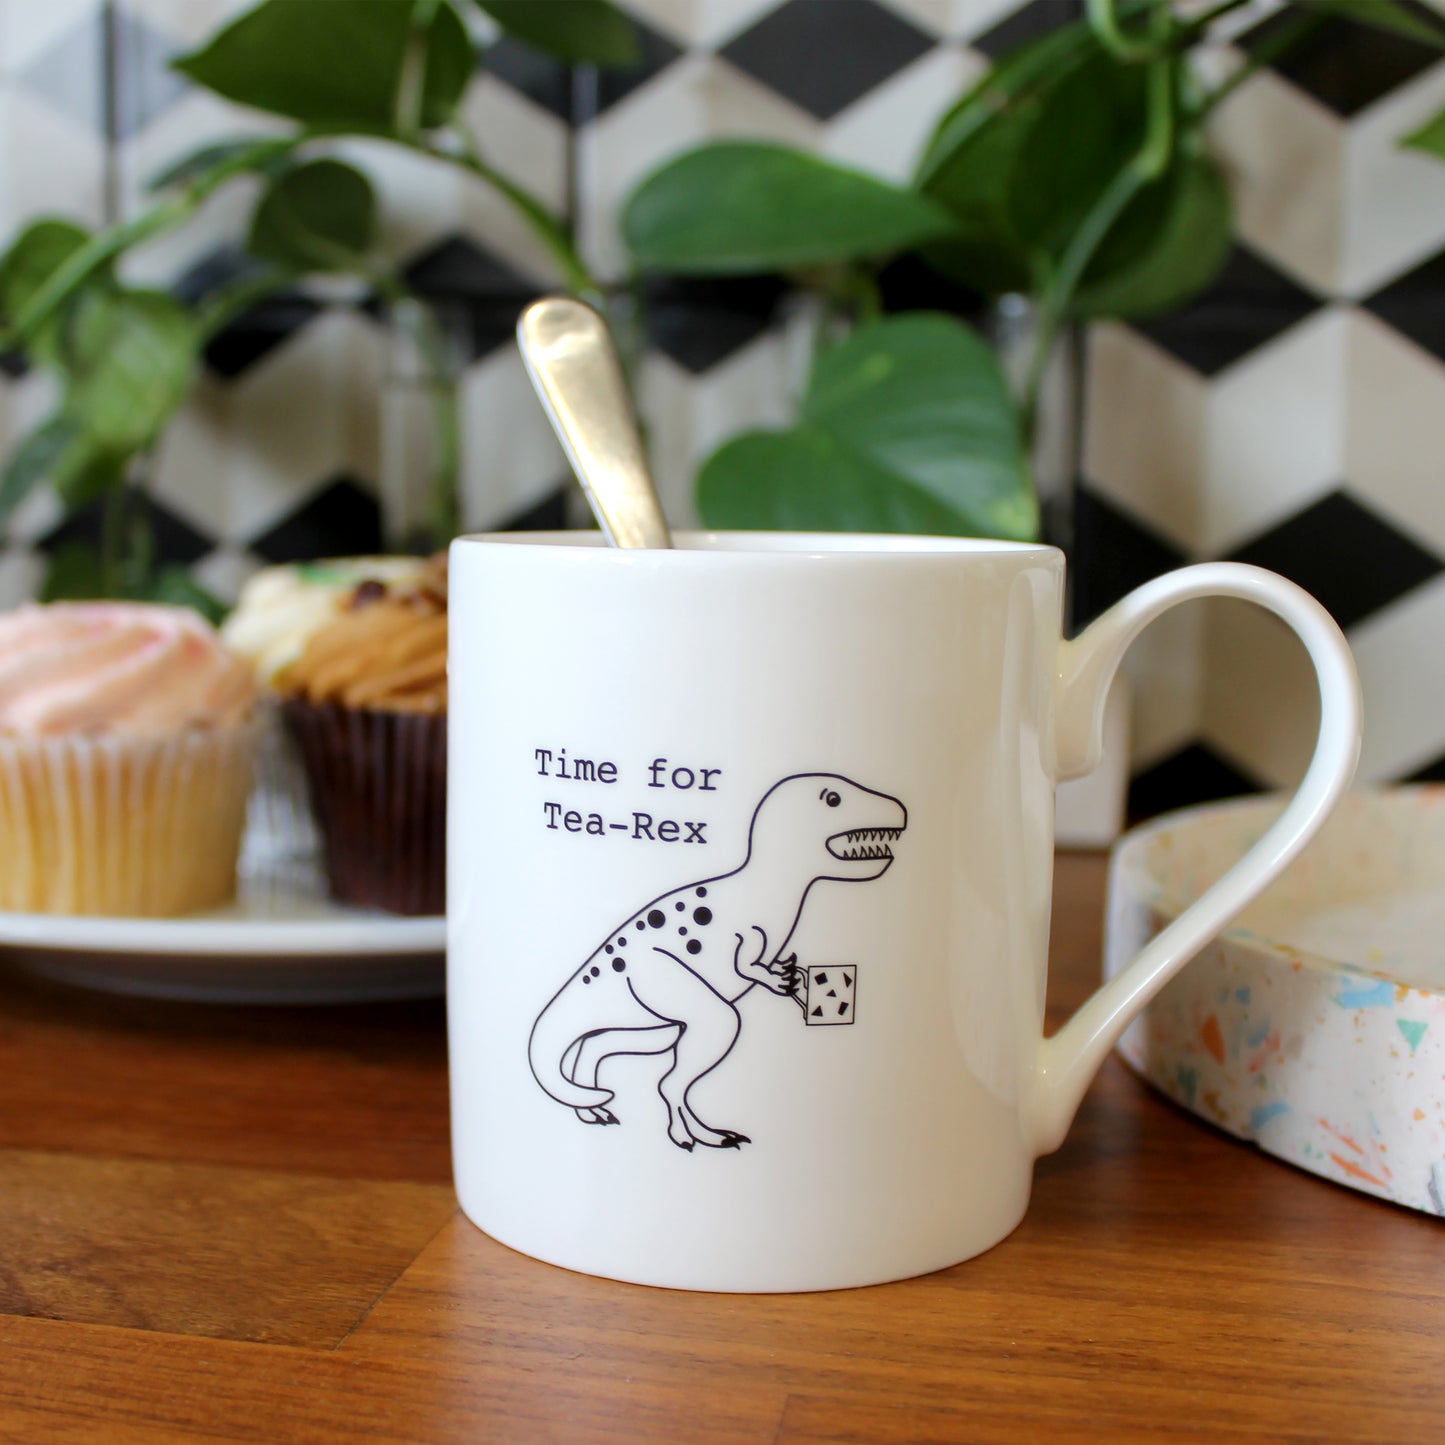 Time for Tea-Rex Mug in a kitchen with plants and cupcakes behind it